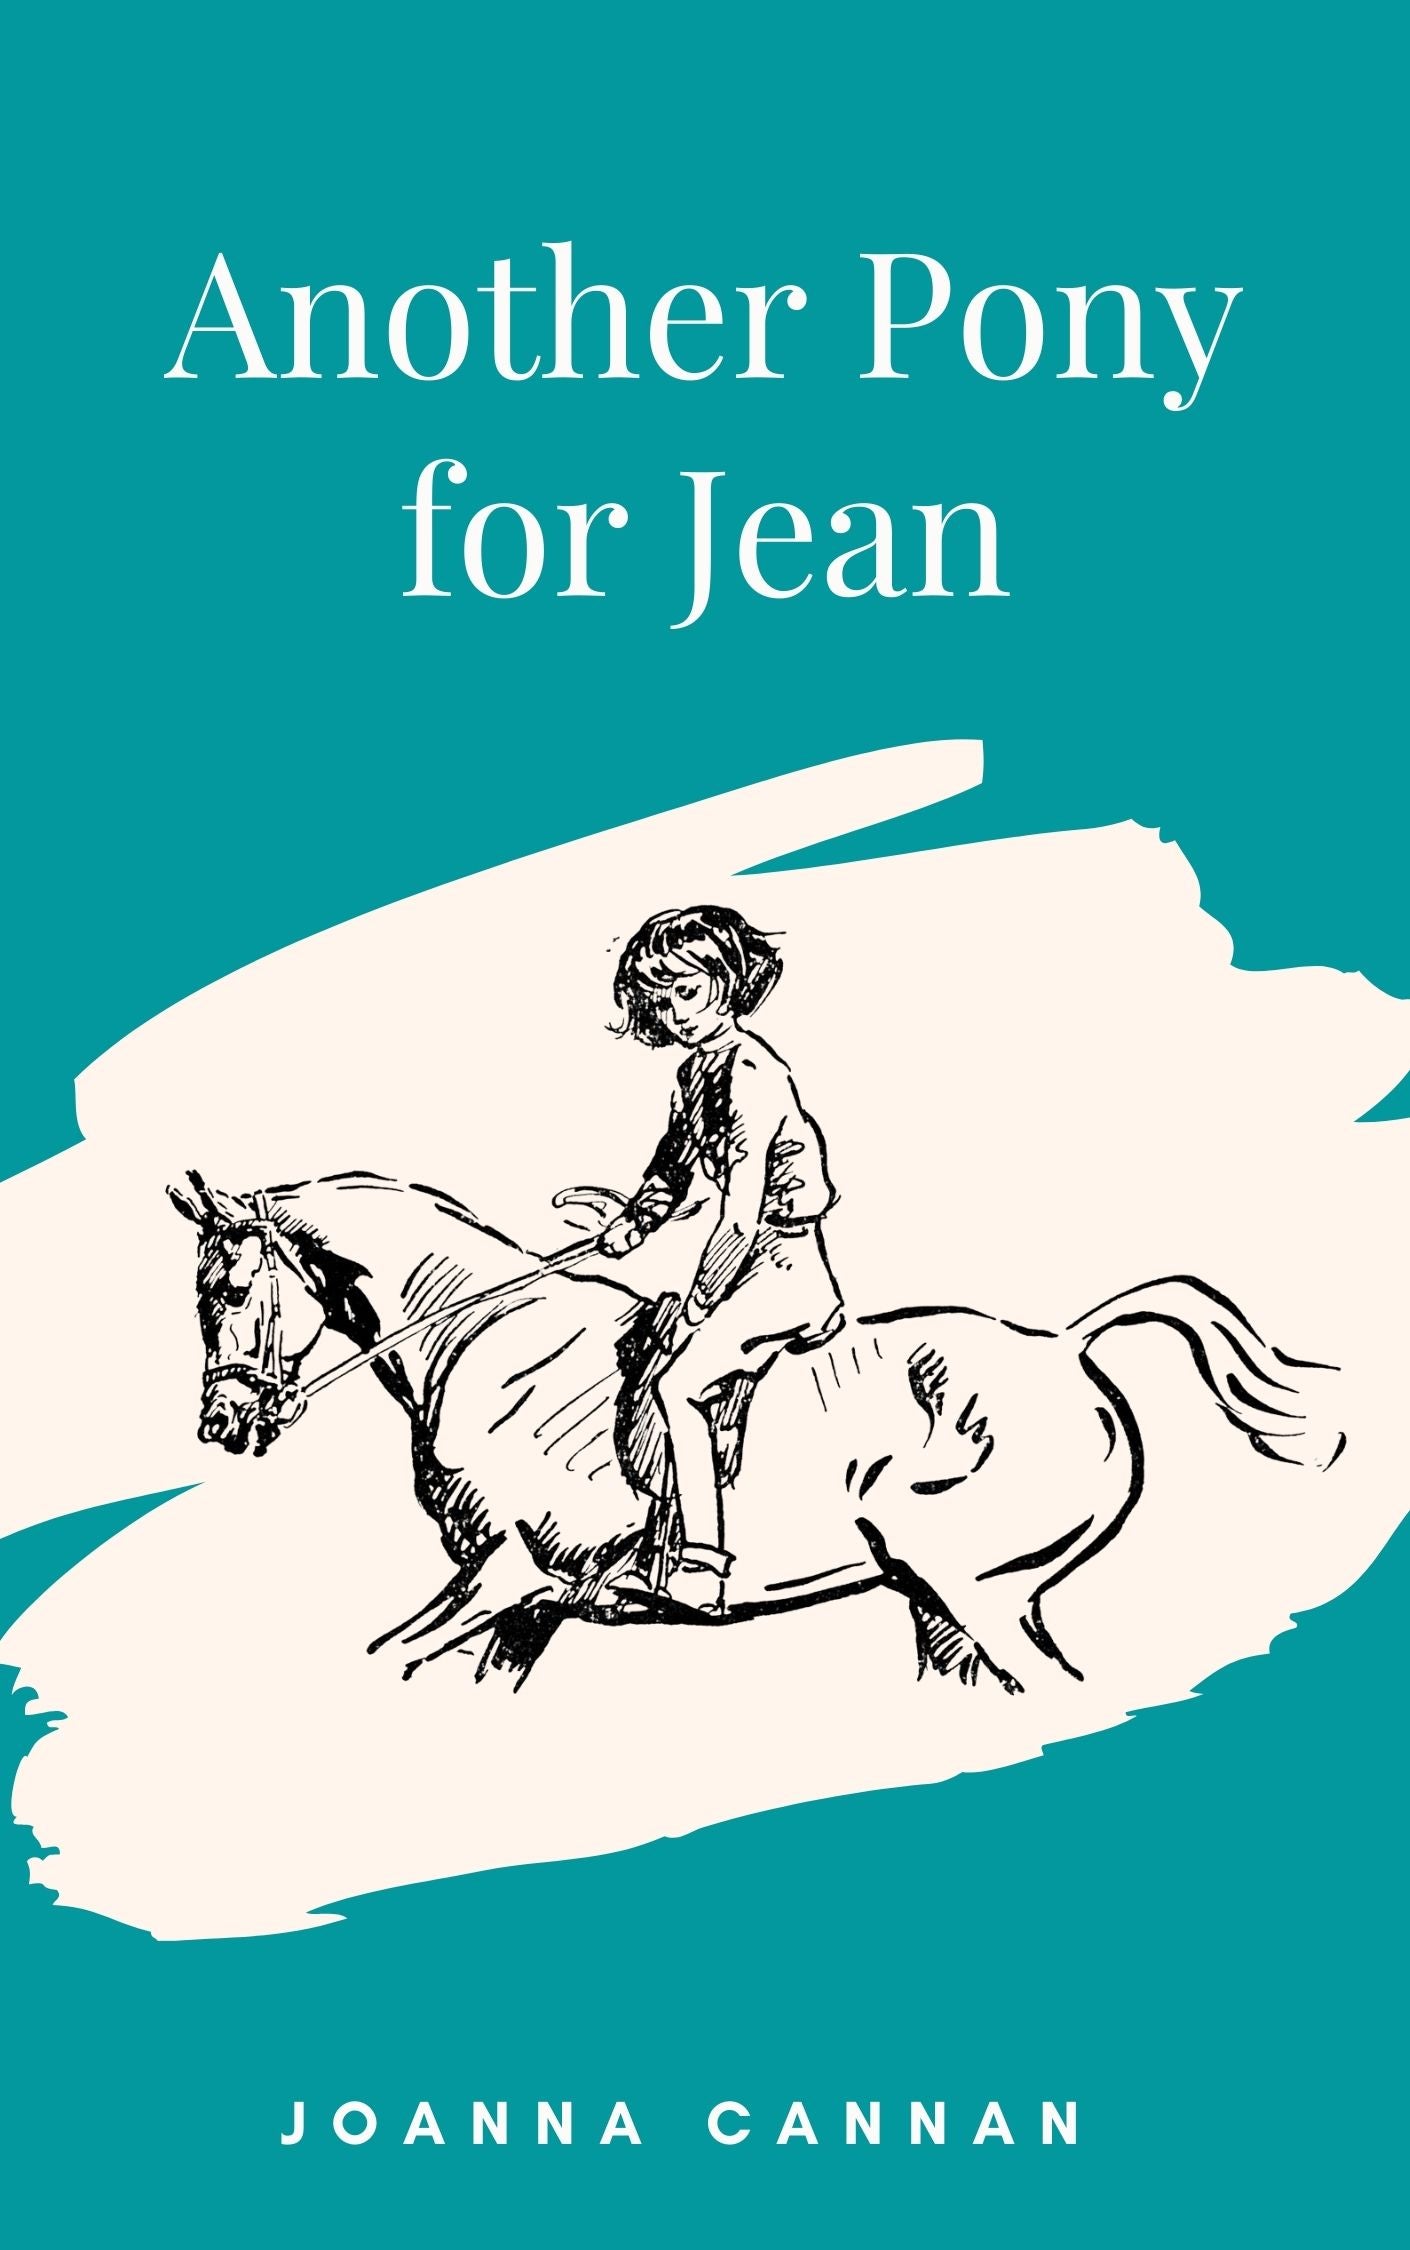 Joanna Cannan: Another Pony for Jean (eBook)